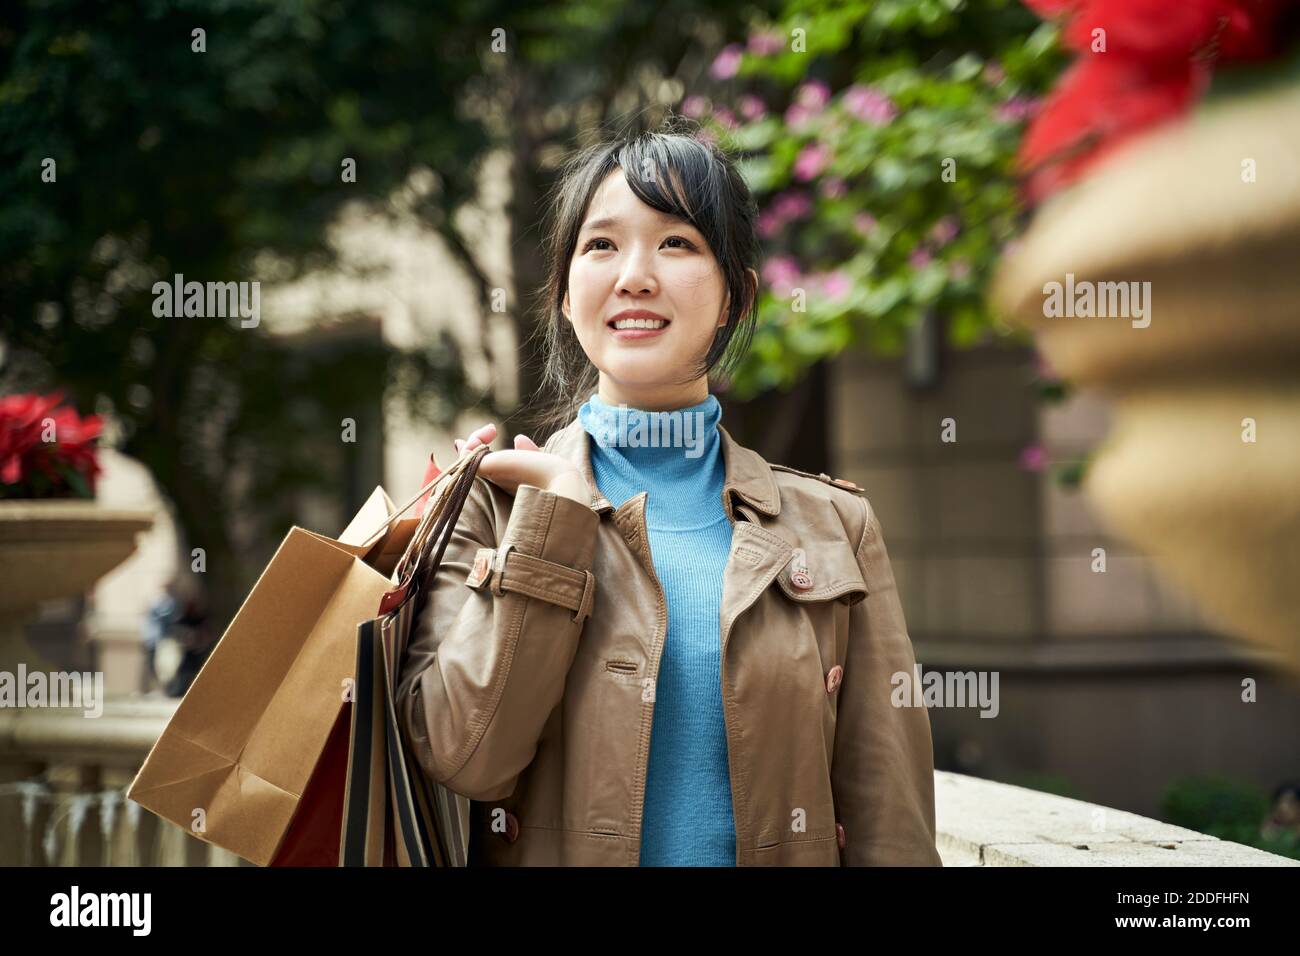 young asian fashionable woman carrying shopping bags, happy and smiling Stock Photo